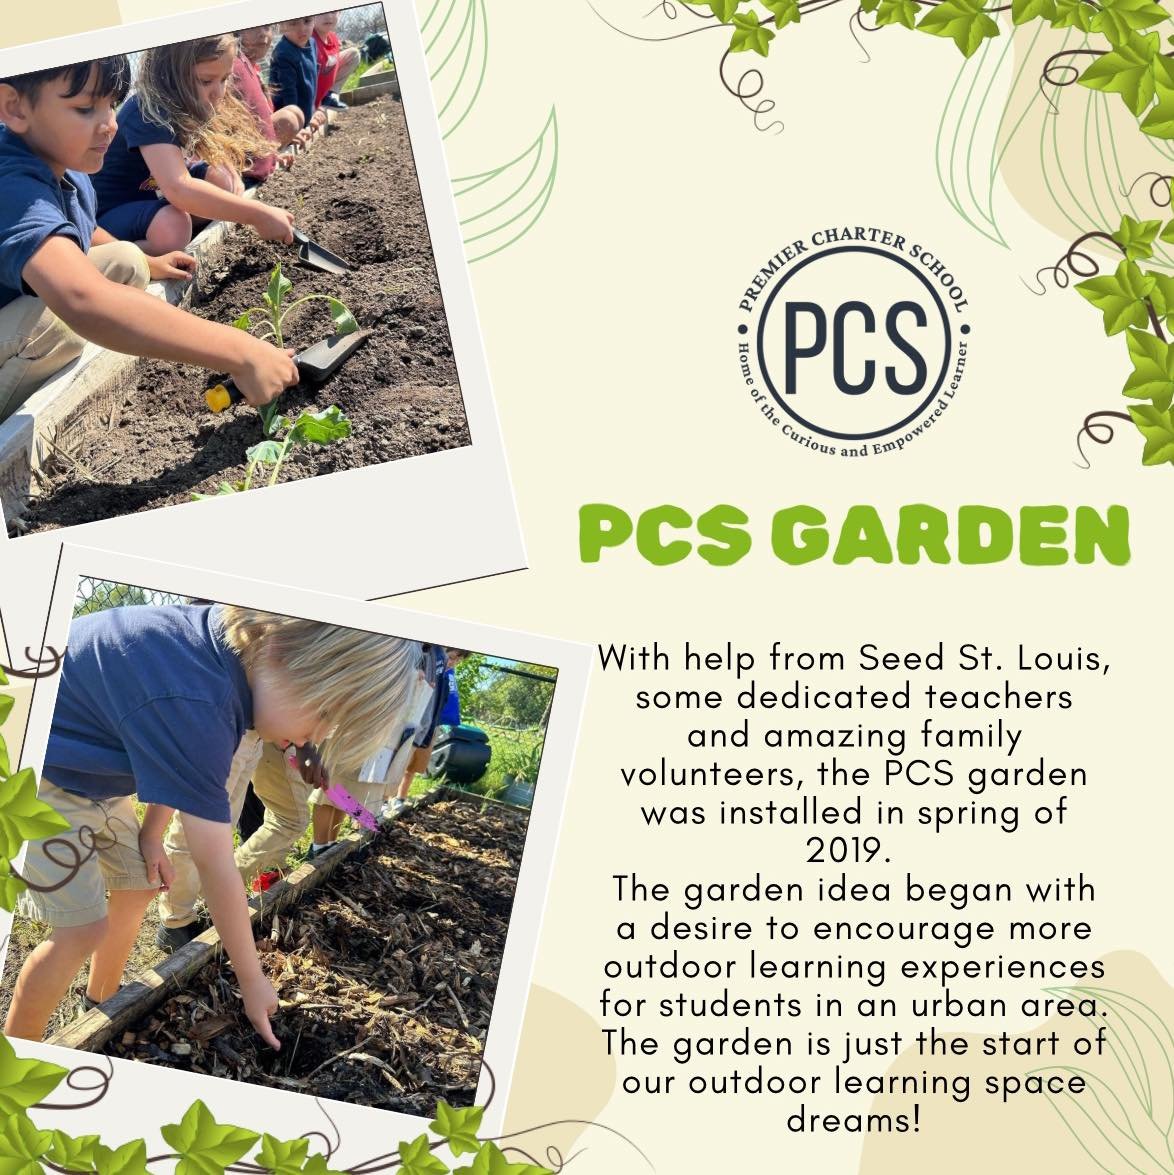 Did you know that Premier Charter School has a garden?!

With the help from Seed St. Louis, teachers, and family volunteers, the PCS garden was installed in Spring 2019.

Our Kindergarteners have been working hard during their recent Garden Project B